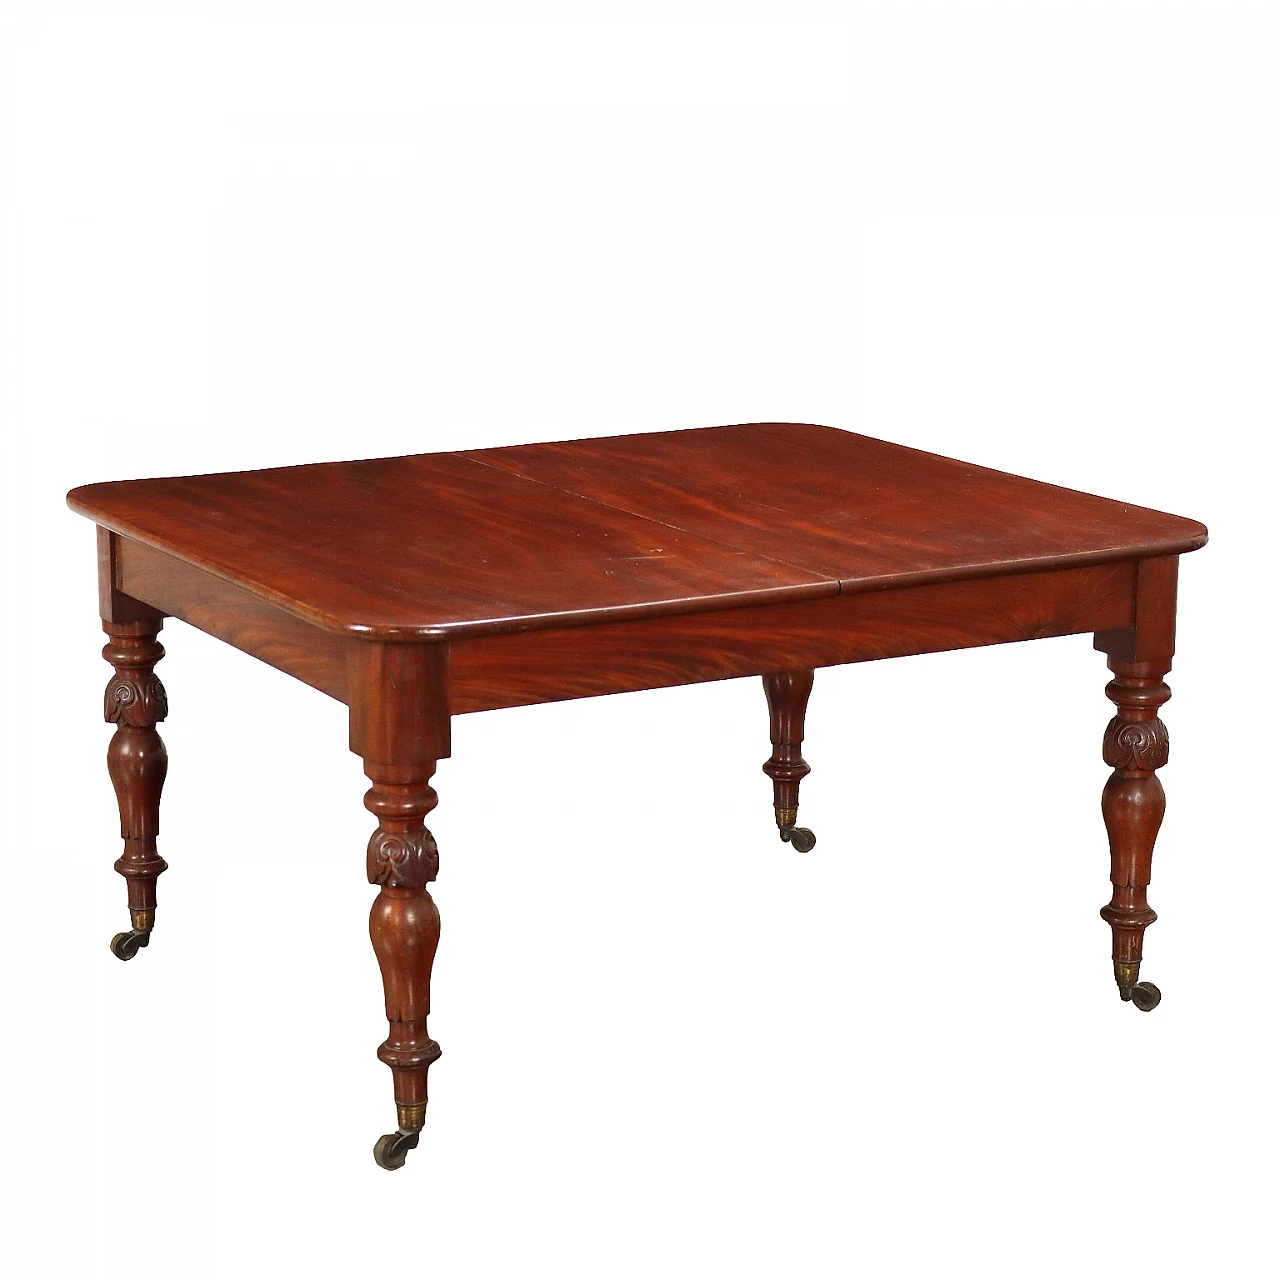 Mahogany extending table with wheels, early 20th century 1